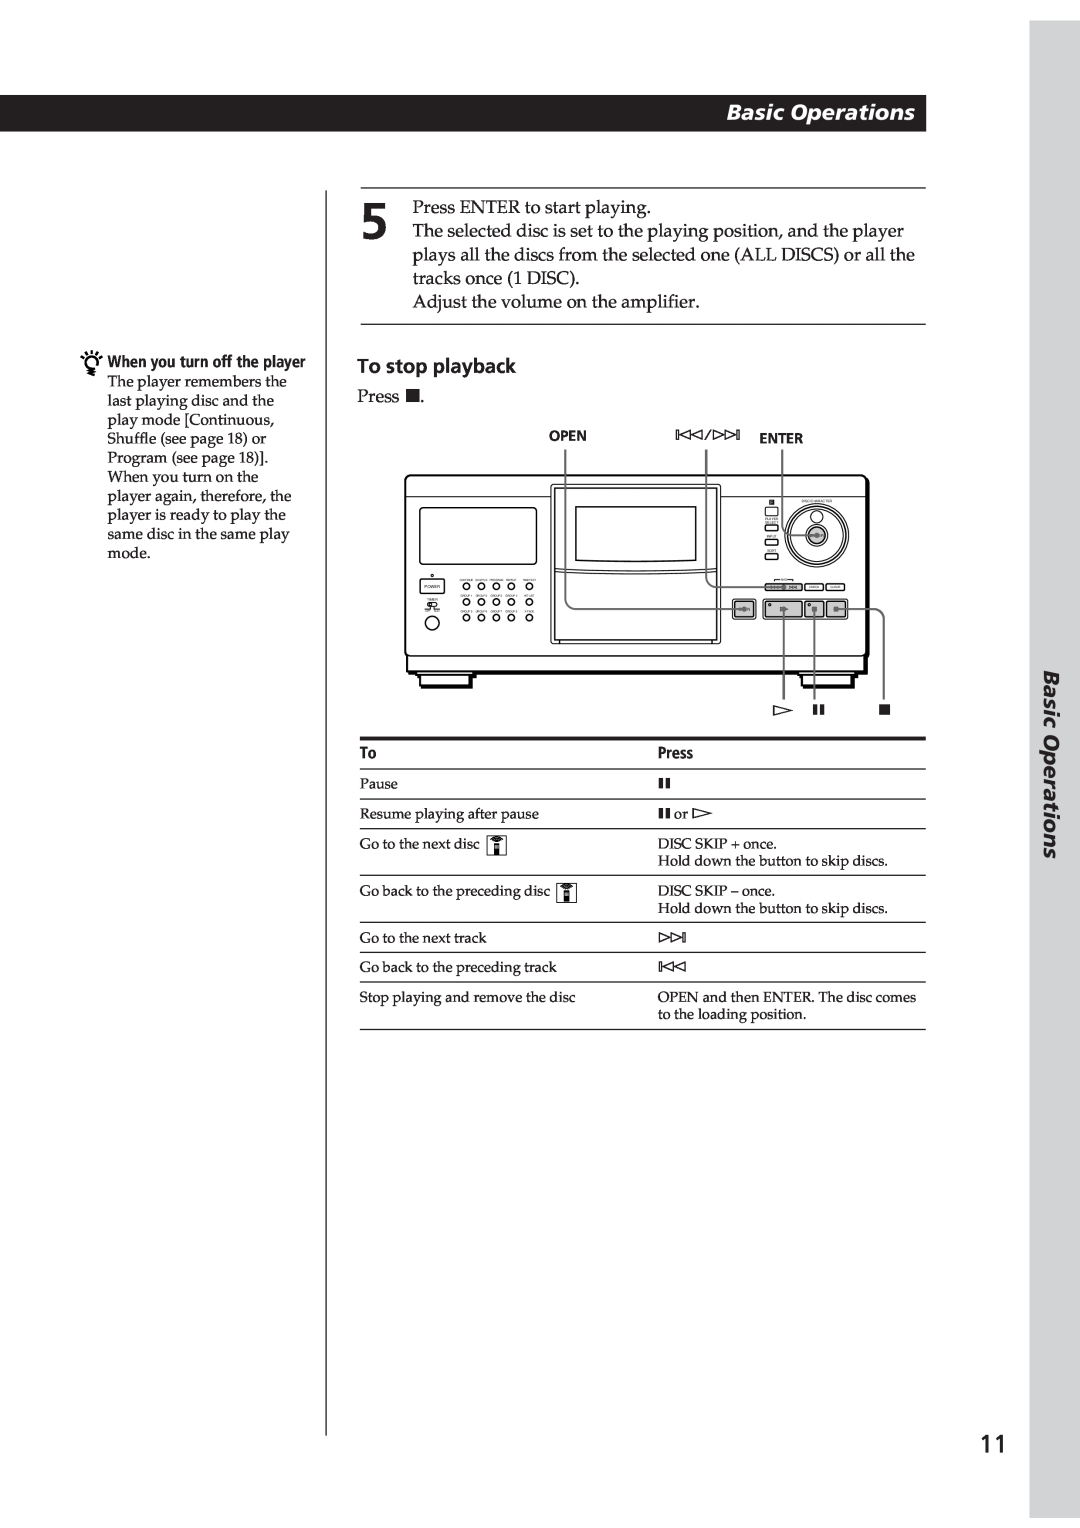 Sony Ericsson CDP-CX270 manual To stop playback, Basic Operations, When you turn off the player, Press, Open, ± Enter 